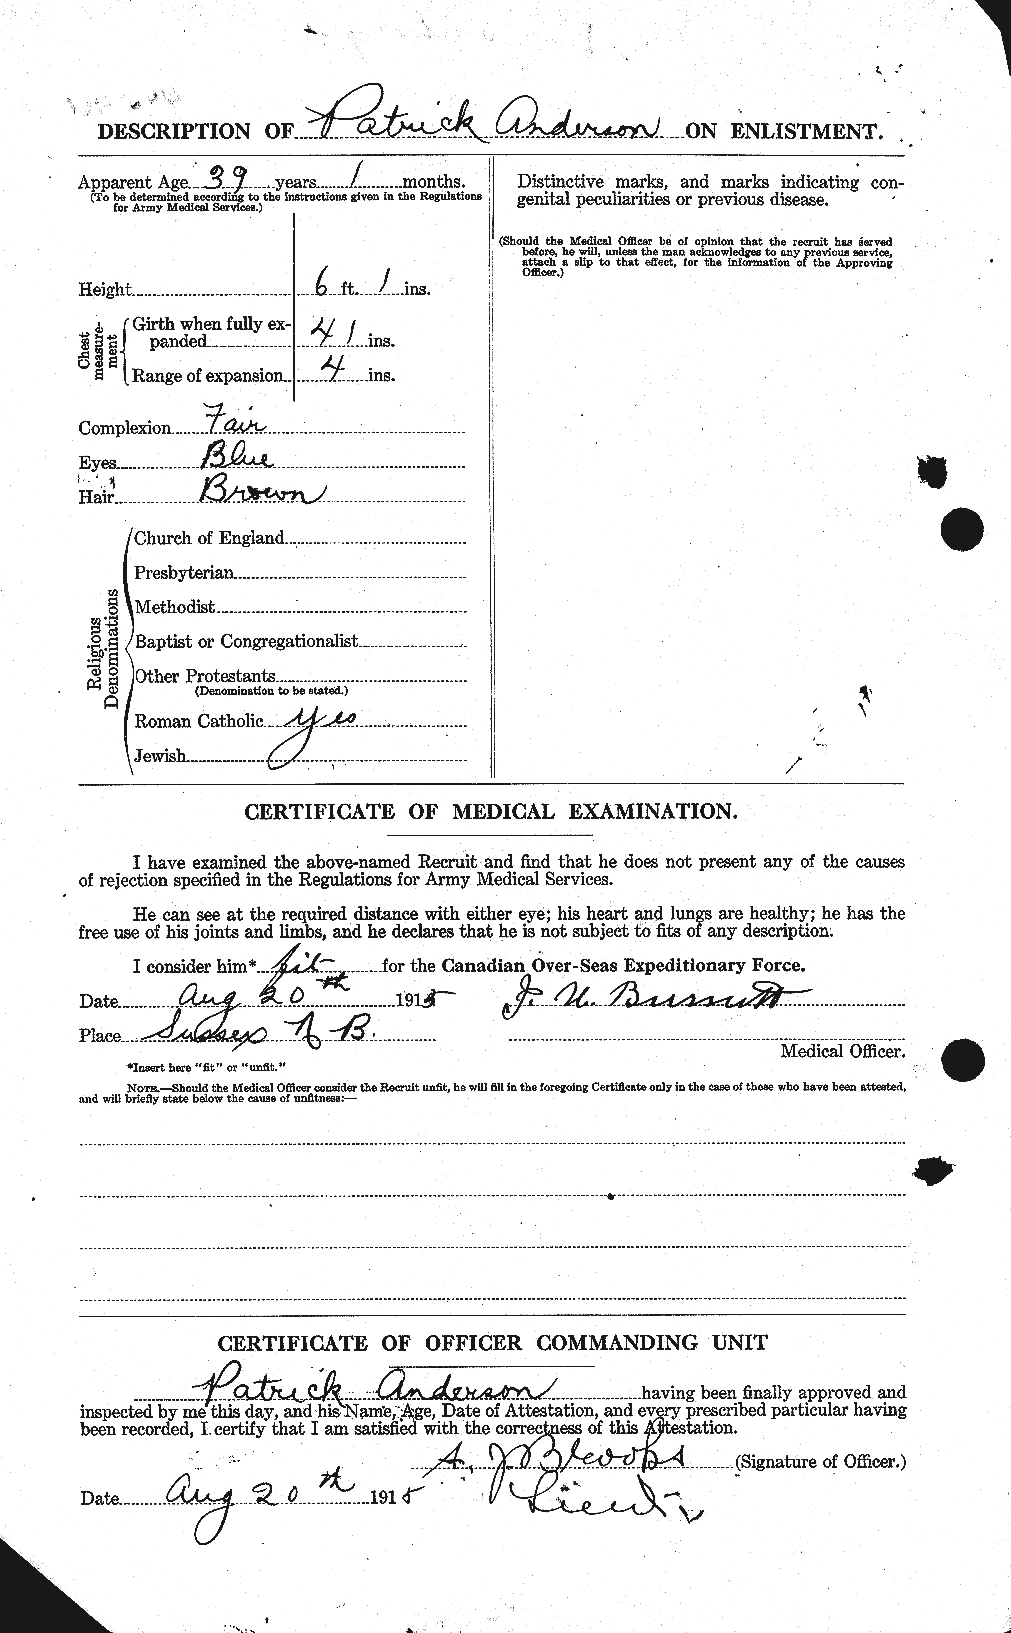 Personnel Records of the First World War - CEF 207372b